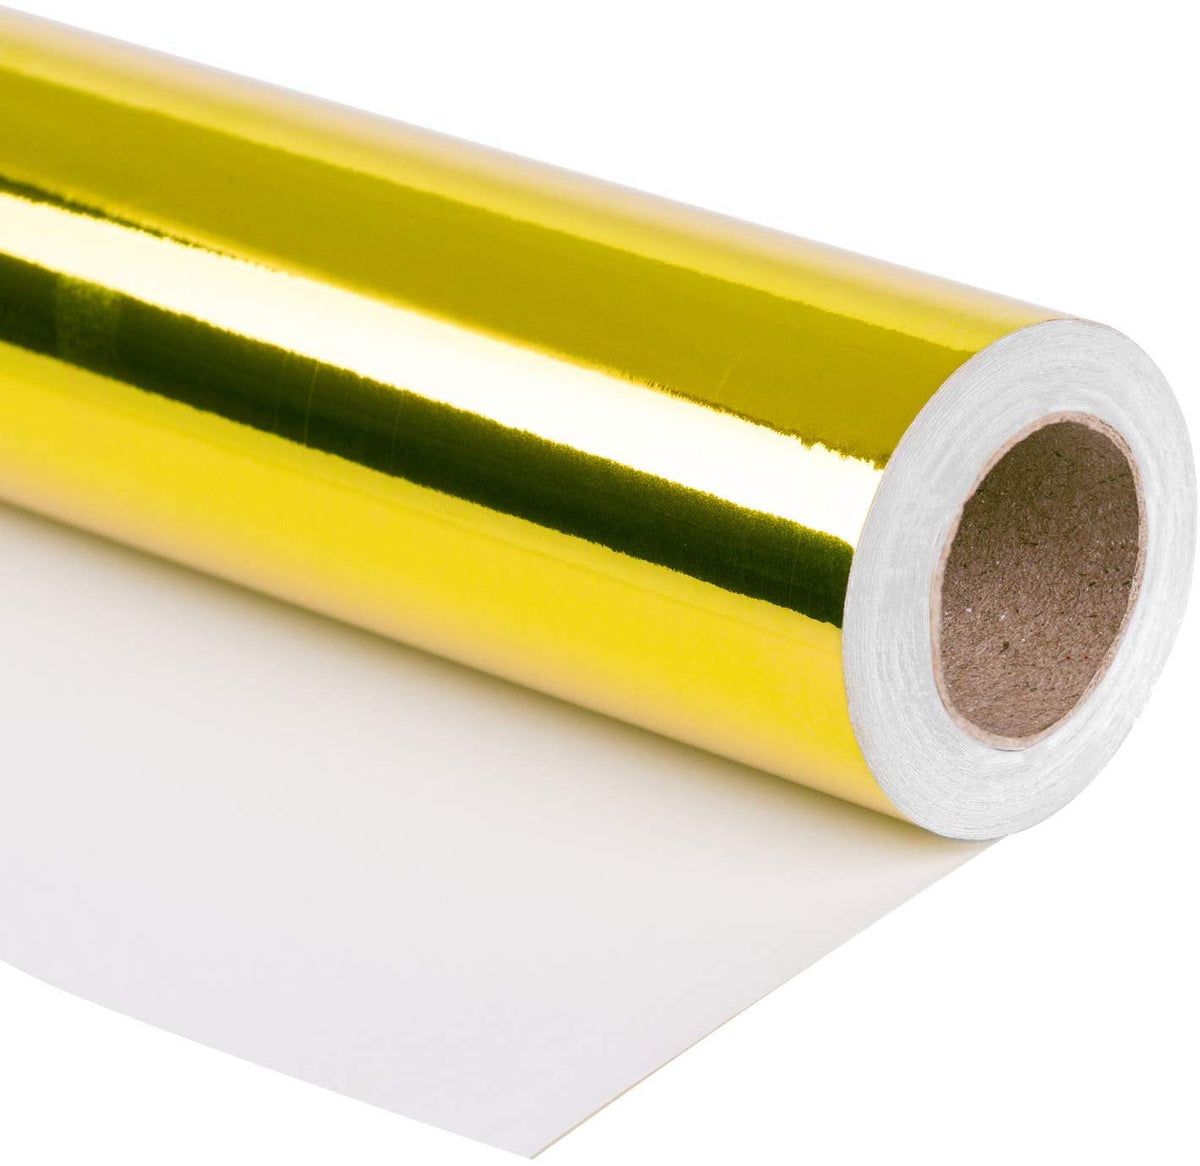 Metallic Wrapping Paper Roll, Green 32.8